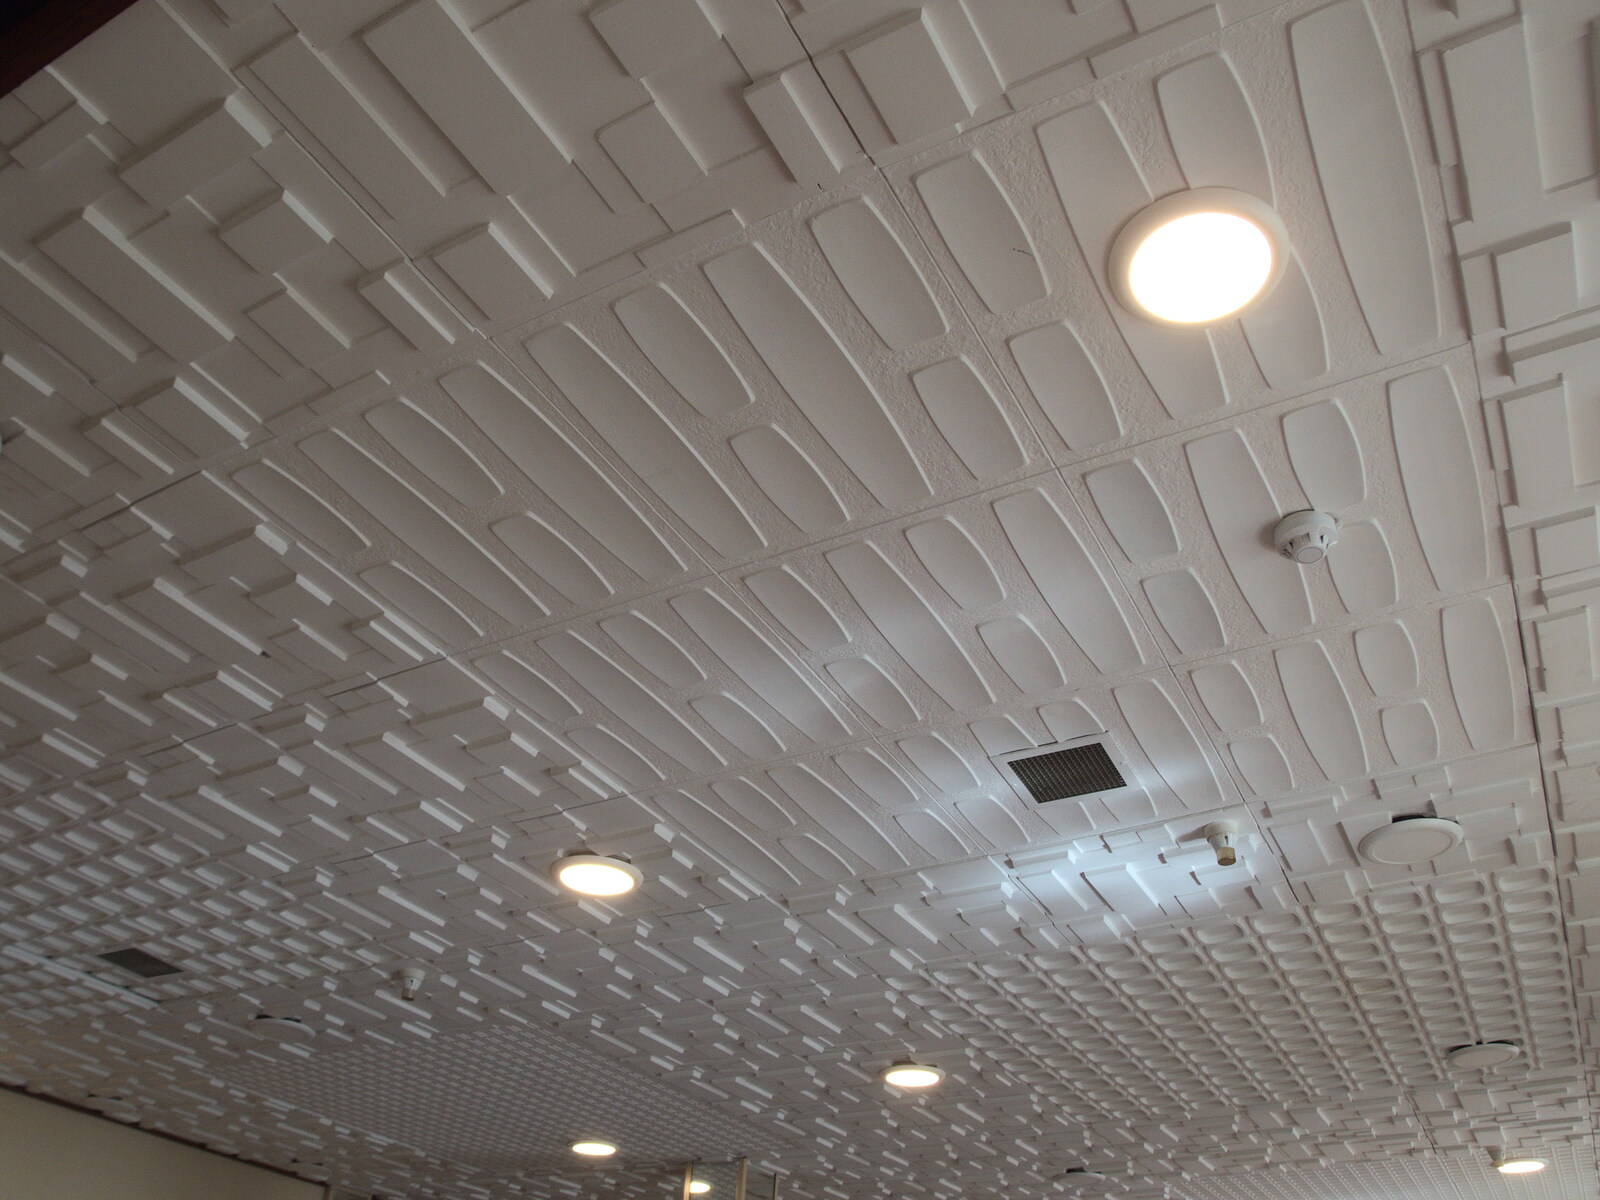 The hotel's restaurant has a funky 1960s ceiling from Faded Seaside Glamour: A Weekend in Great Yarmouth, Norfolk - 29th May 2022